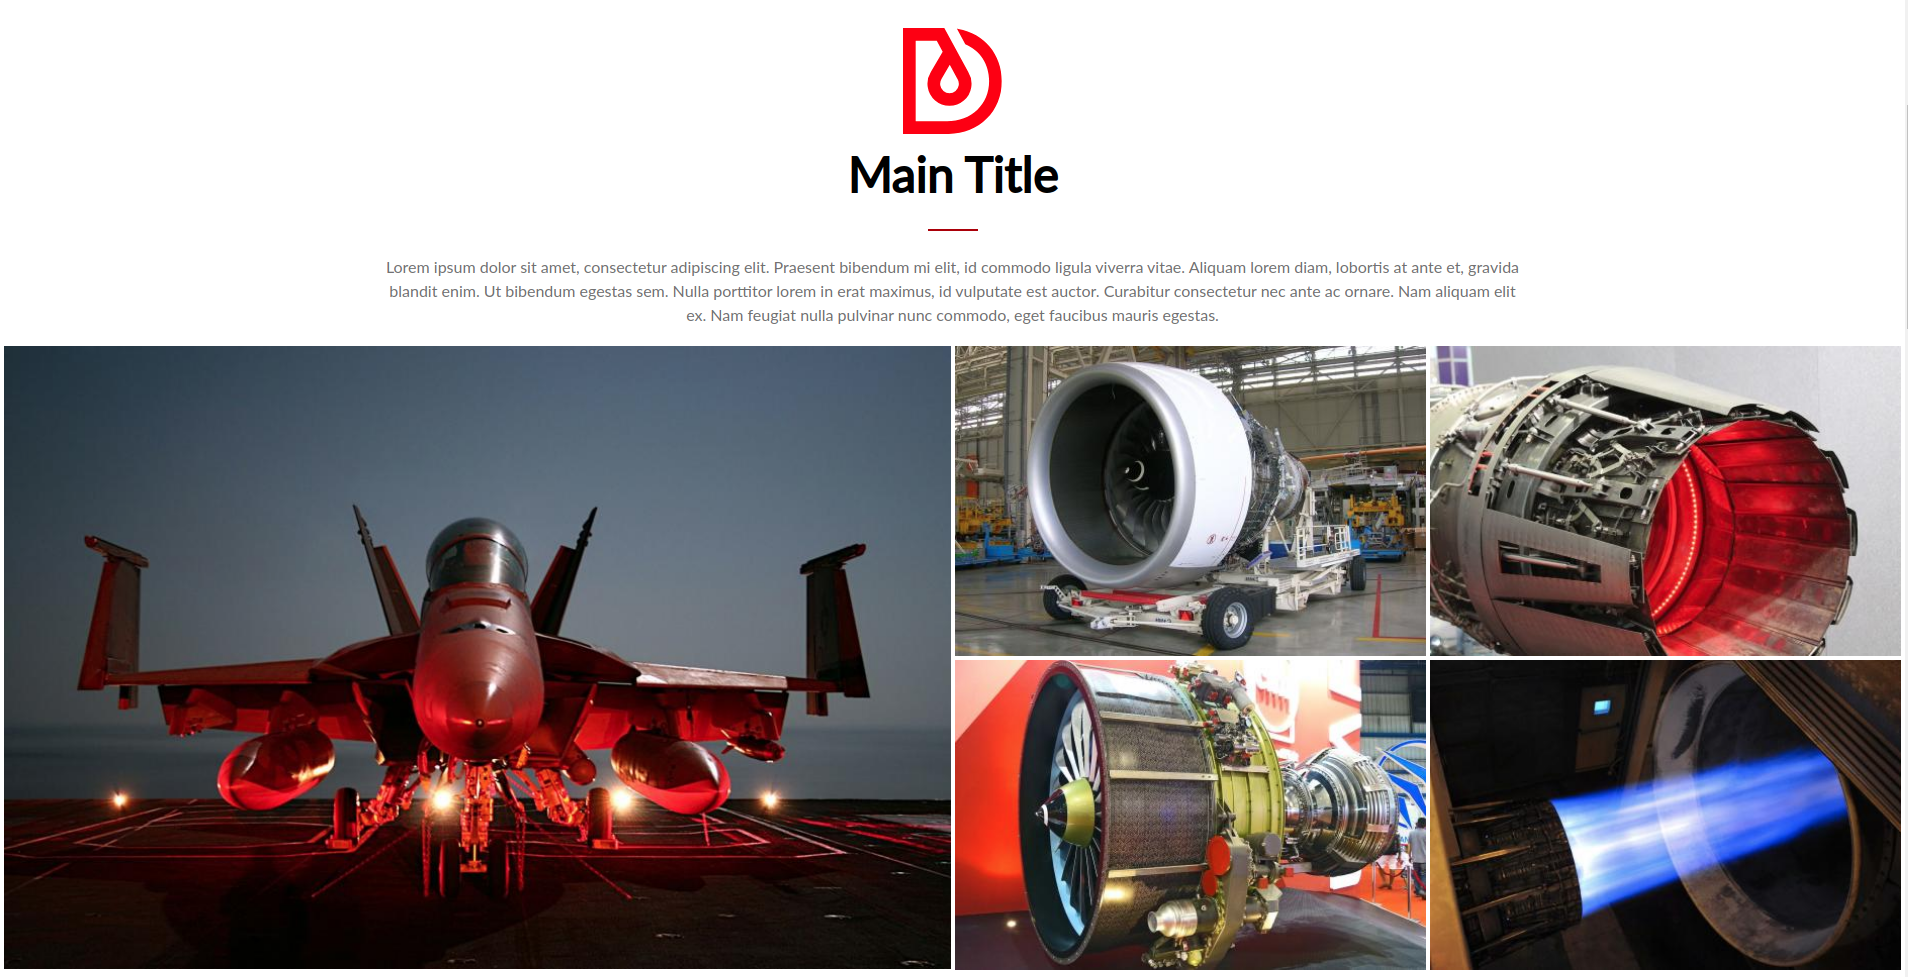 An example of using a photo as a tile on a website based on Droopler, thanks to the Drupal Media module